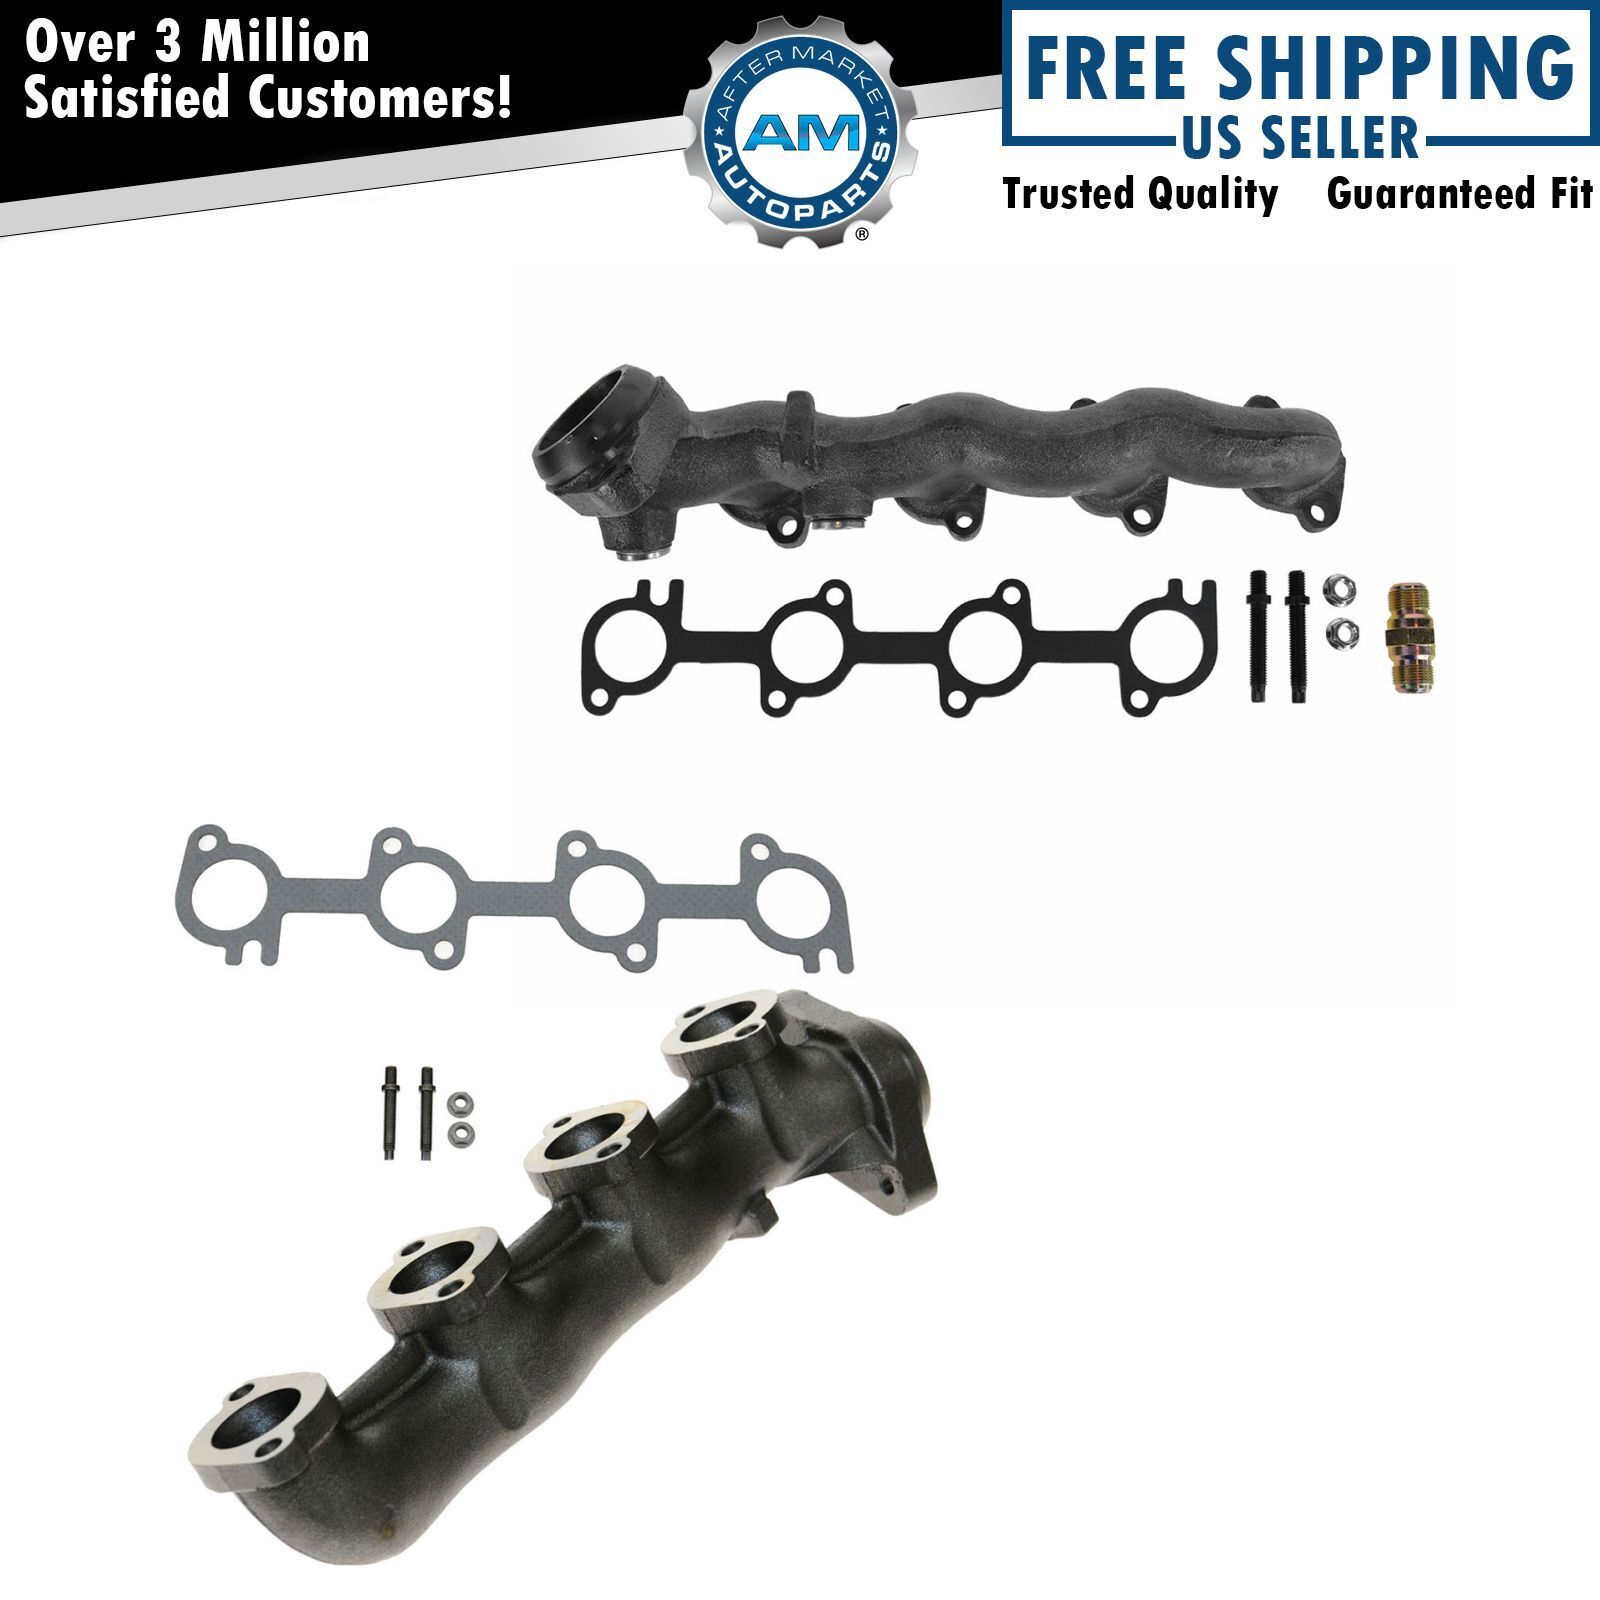 Exhaust Manifold Pair Set for 97-98 Ford Expedition F-Series Pickup Truck 4.6L